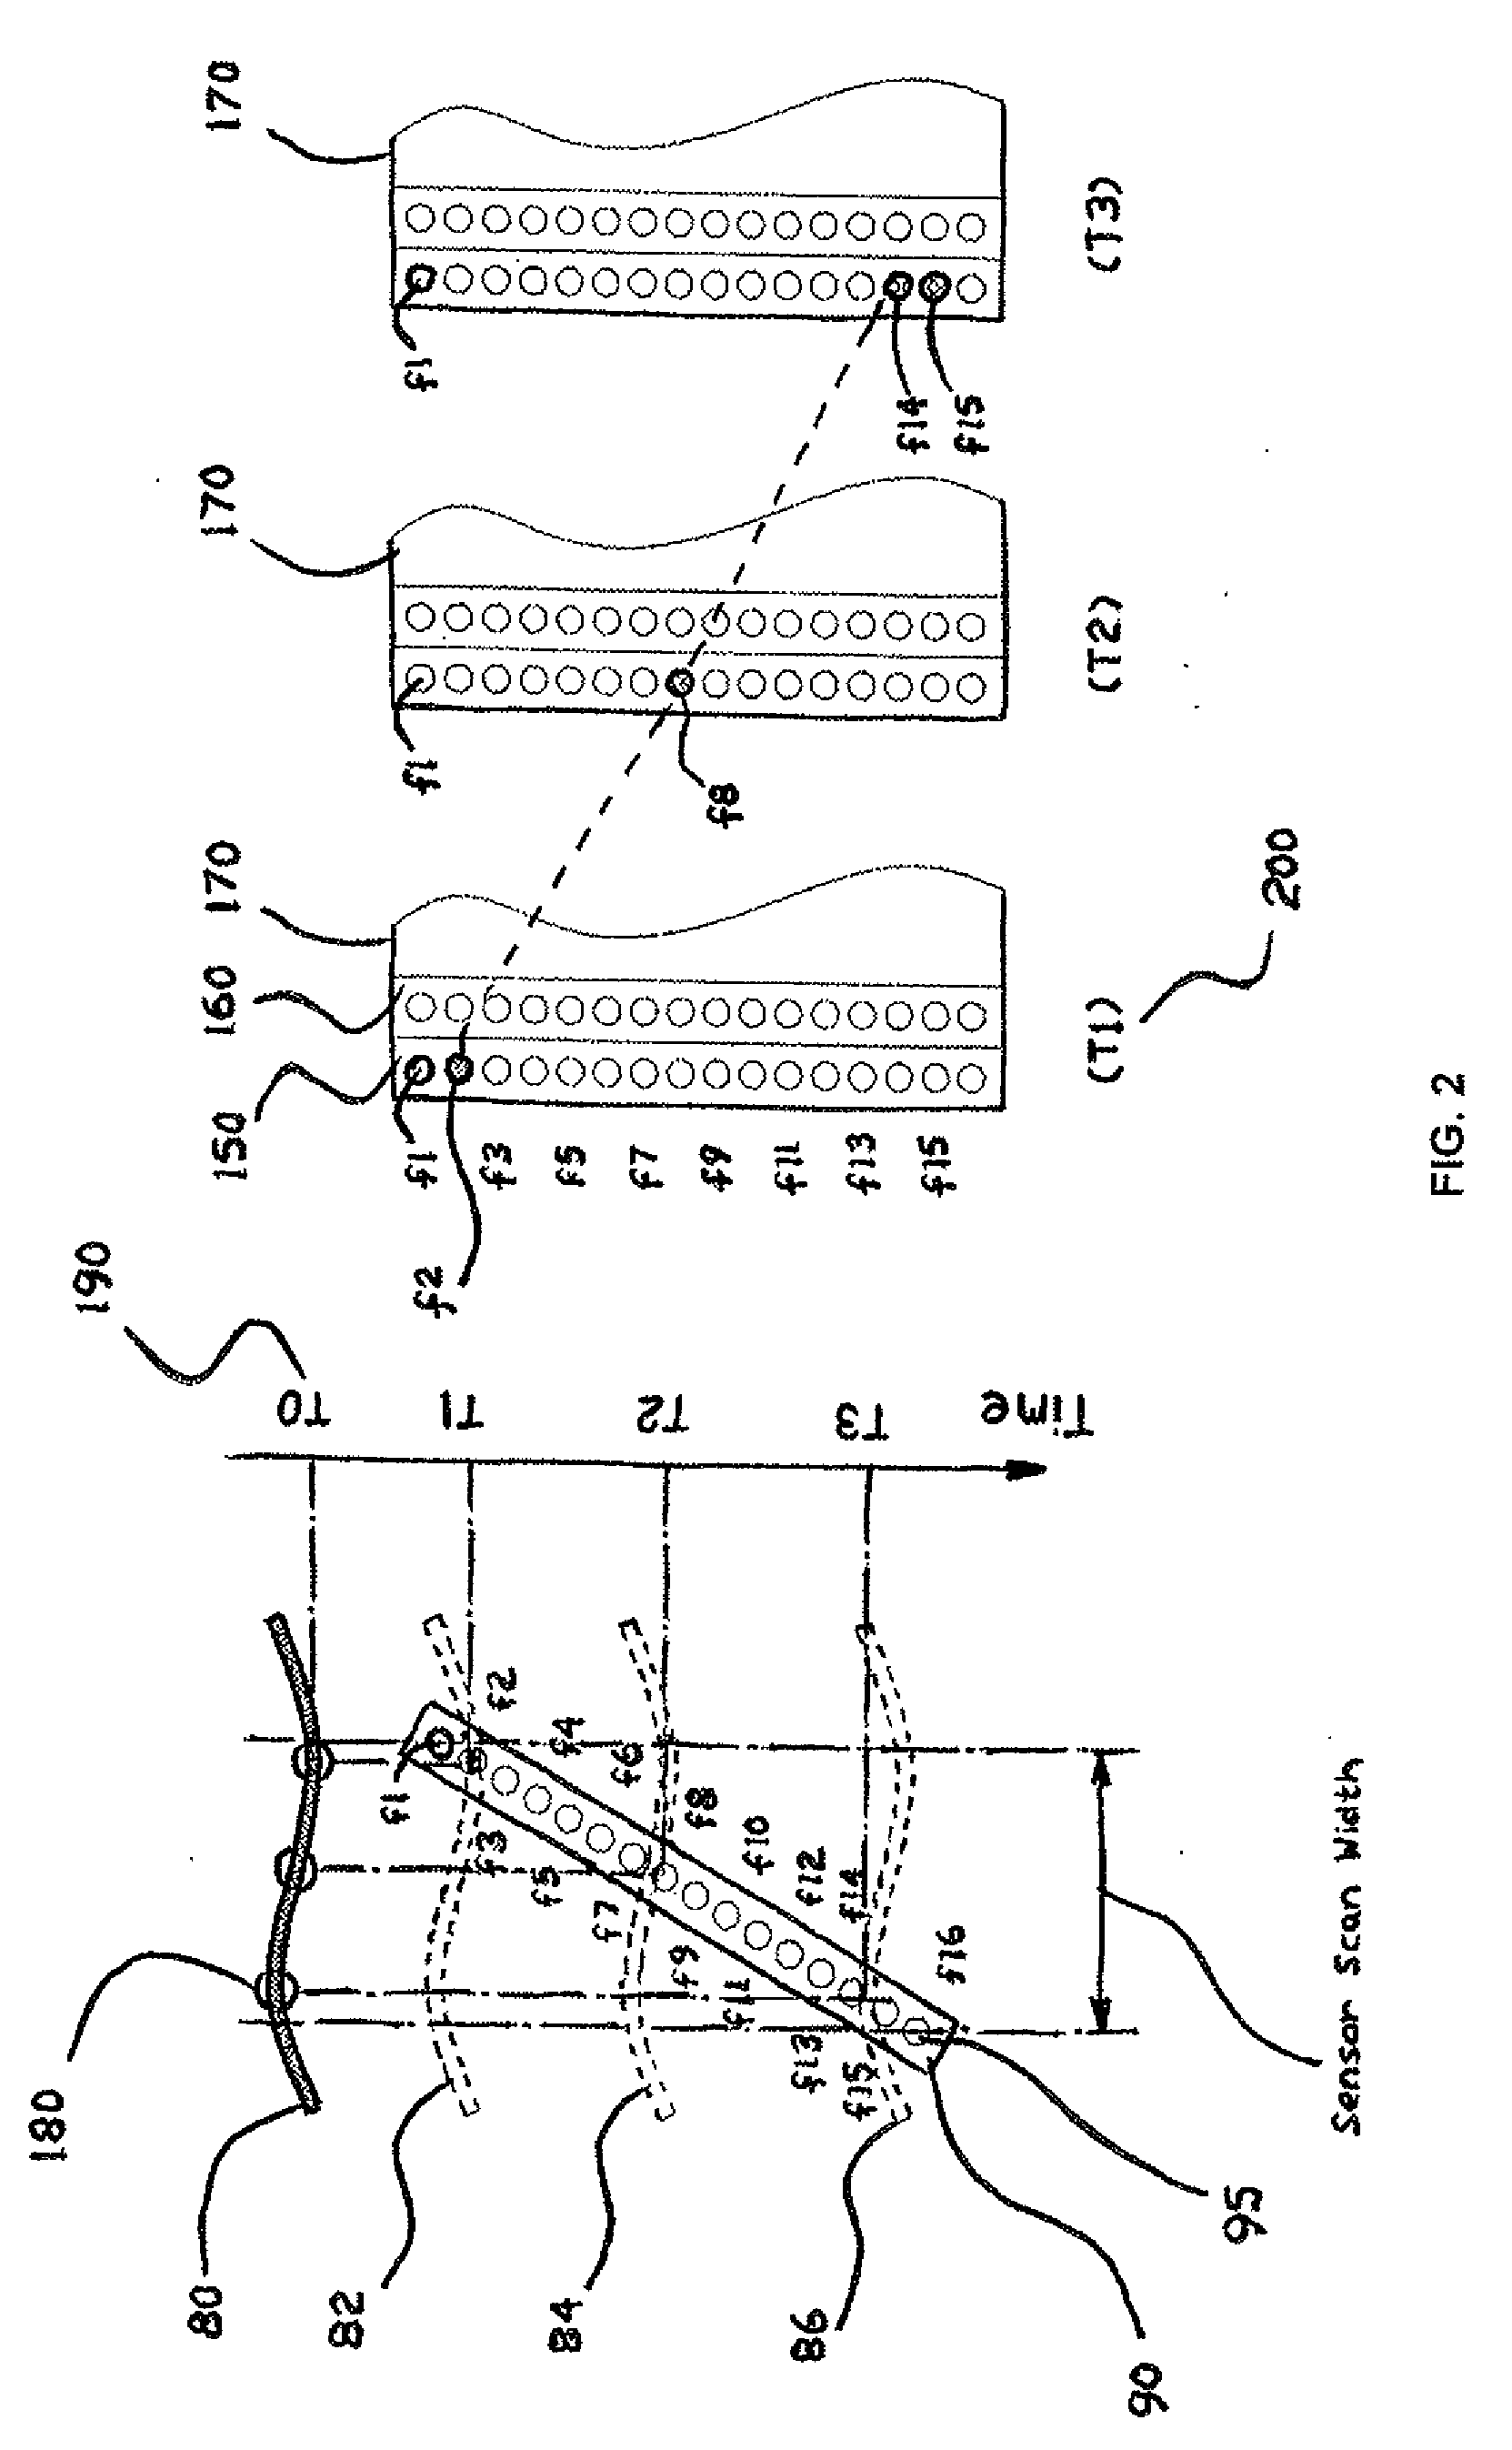 Method and apparatus for detecting defects and embedded objects in sealed sterilized packaging